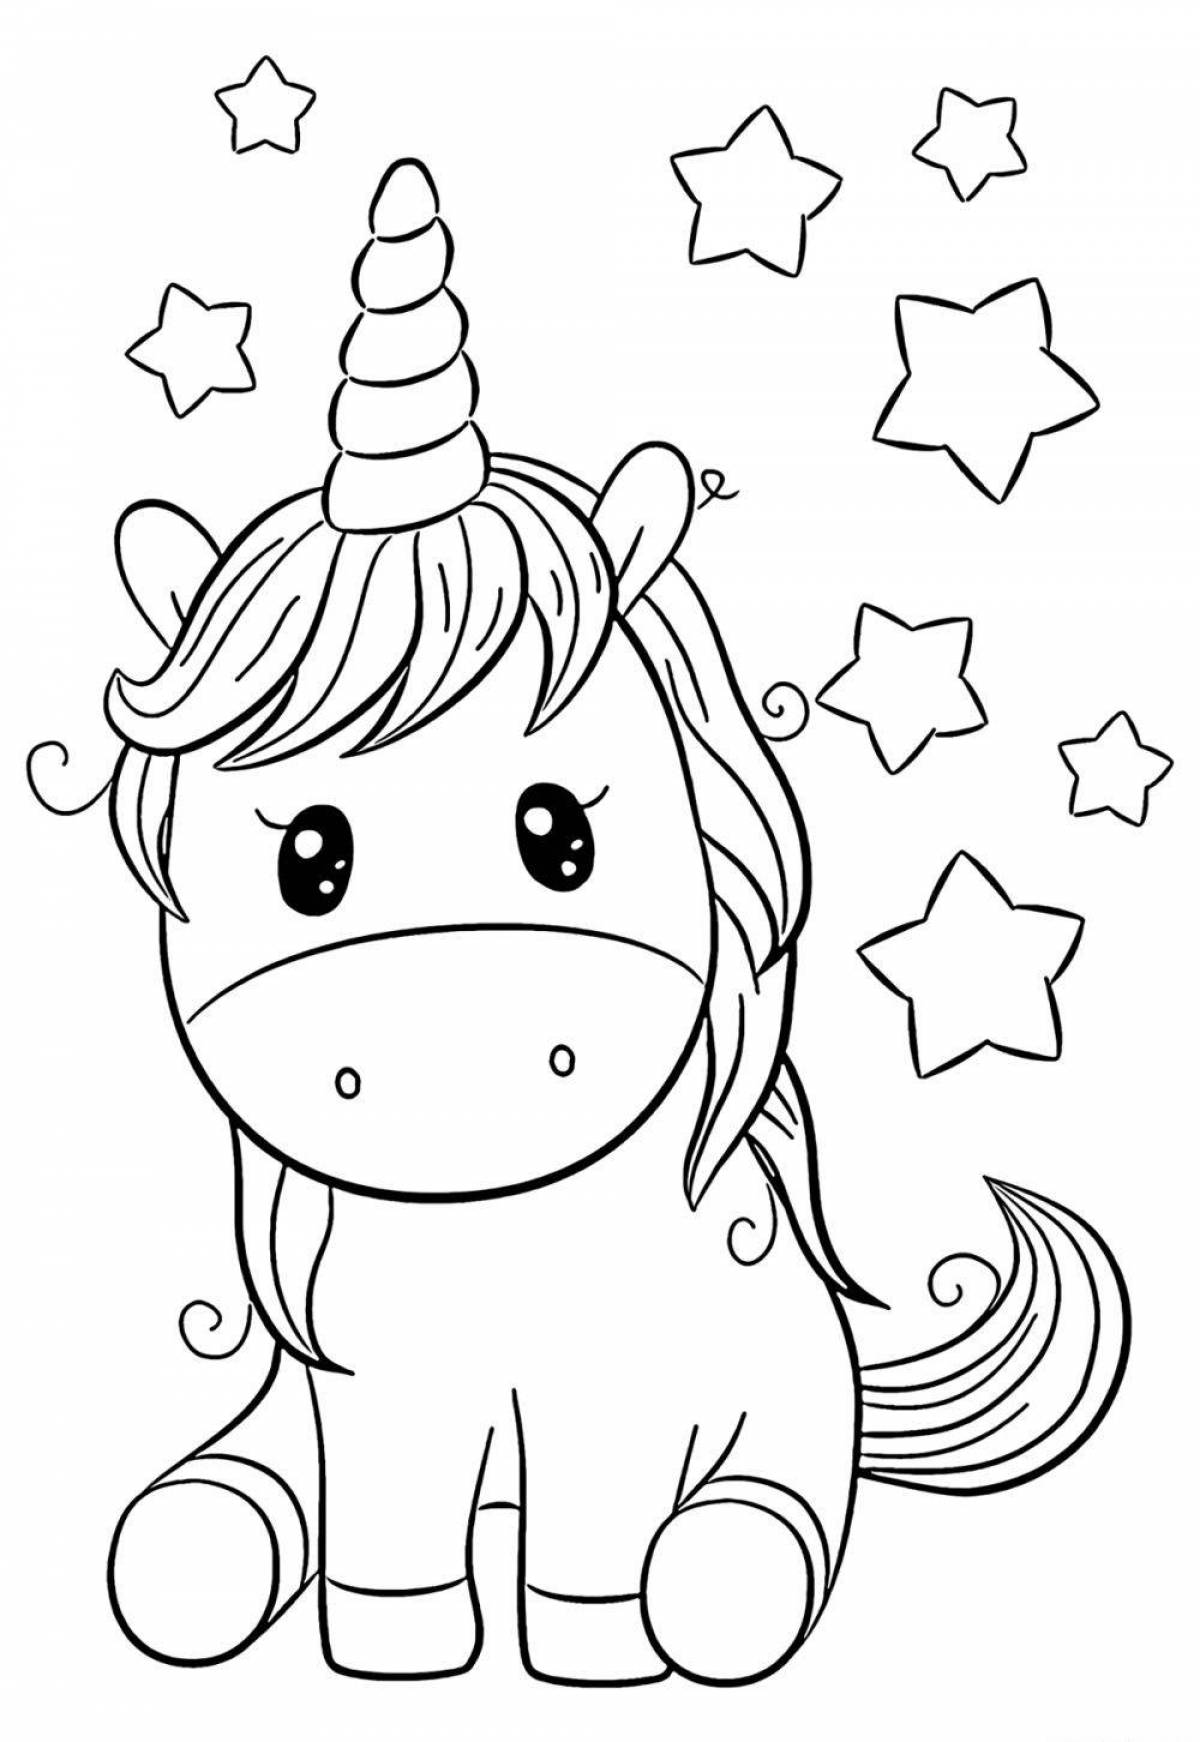 Unicorn holiday coloring book for kids 6-7 years old